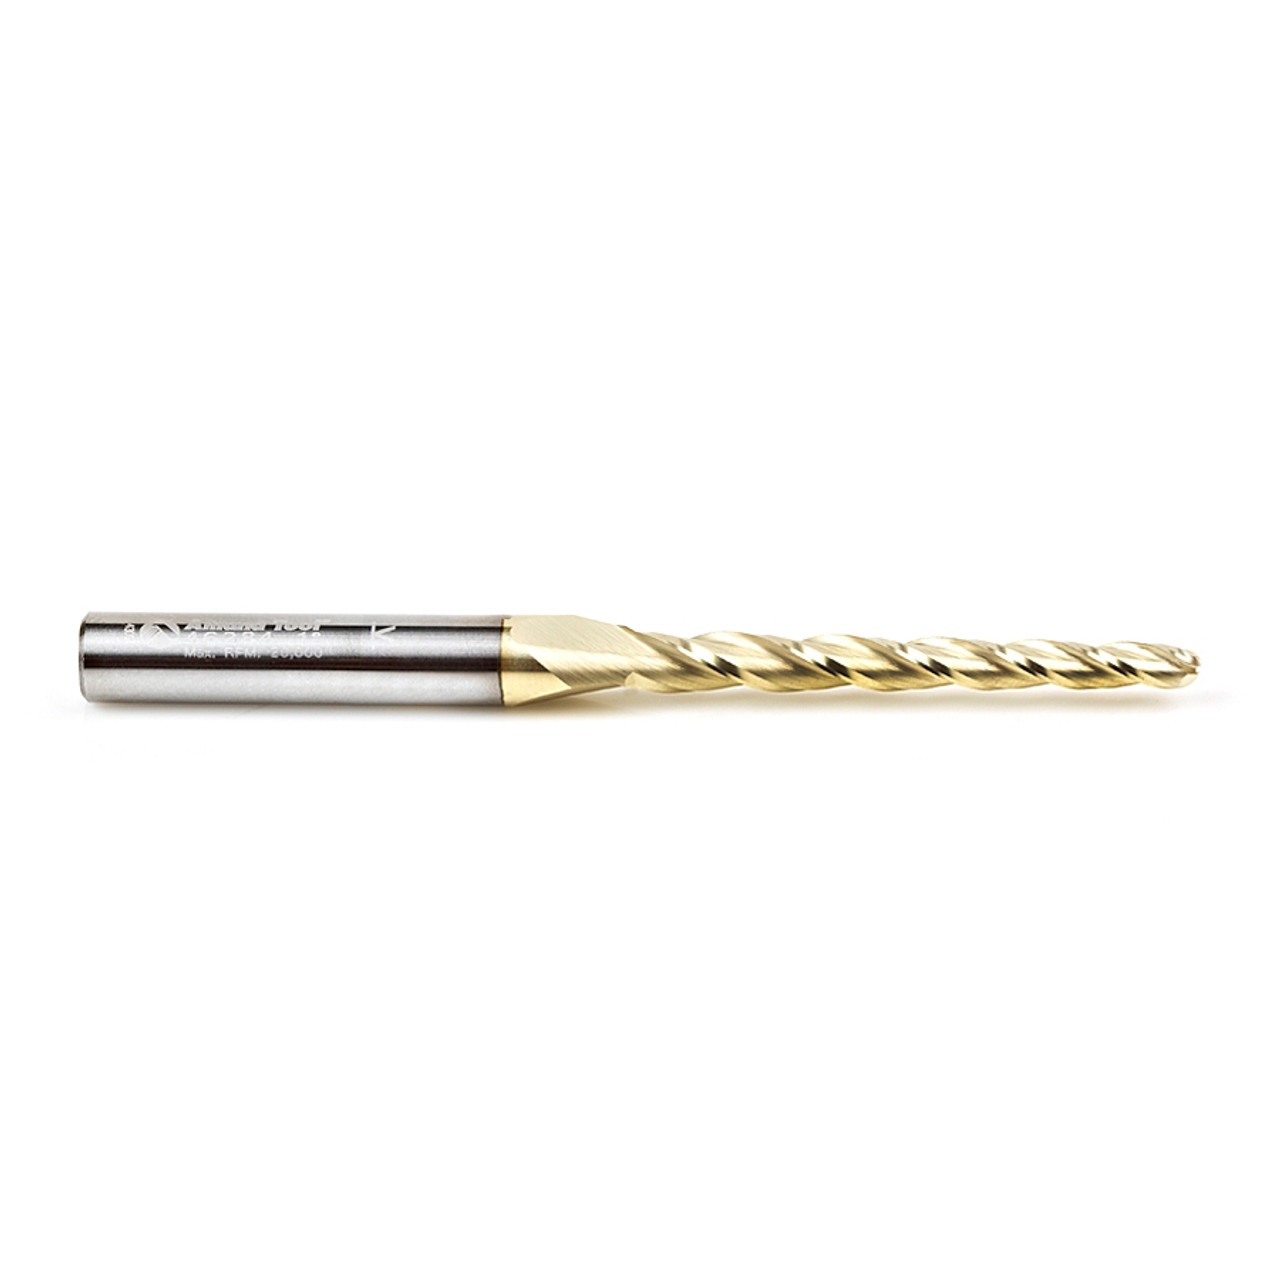 CNC Carving Tapered Ball Nose - Amana Tool 46284, 1/8 D, 3 Flute